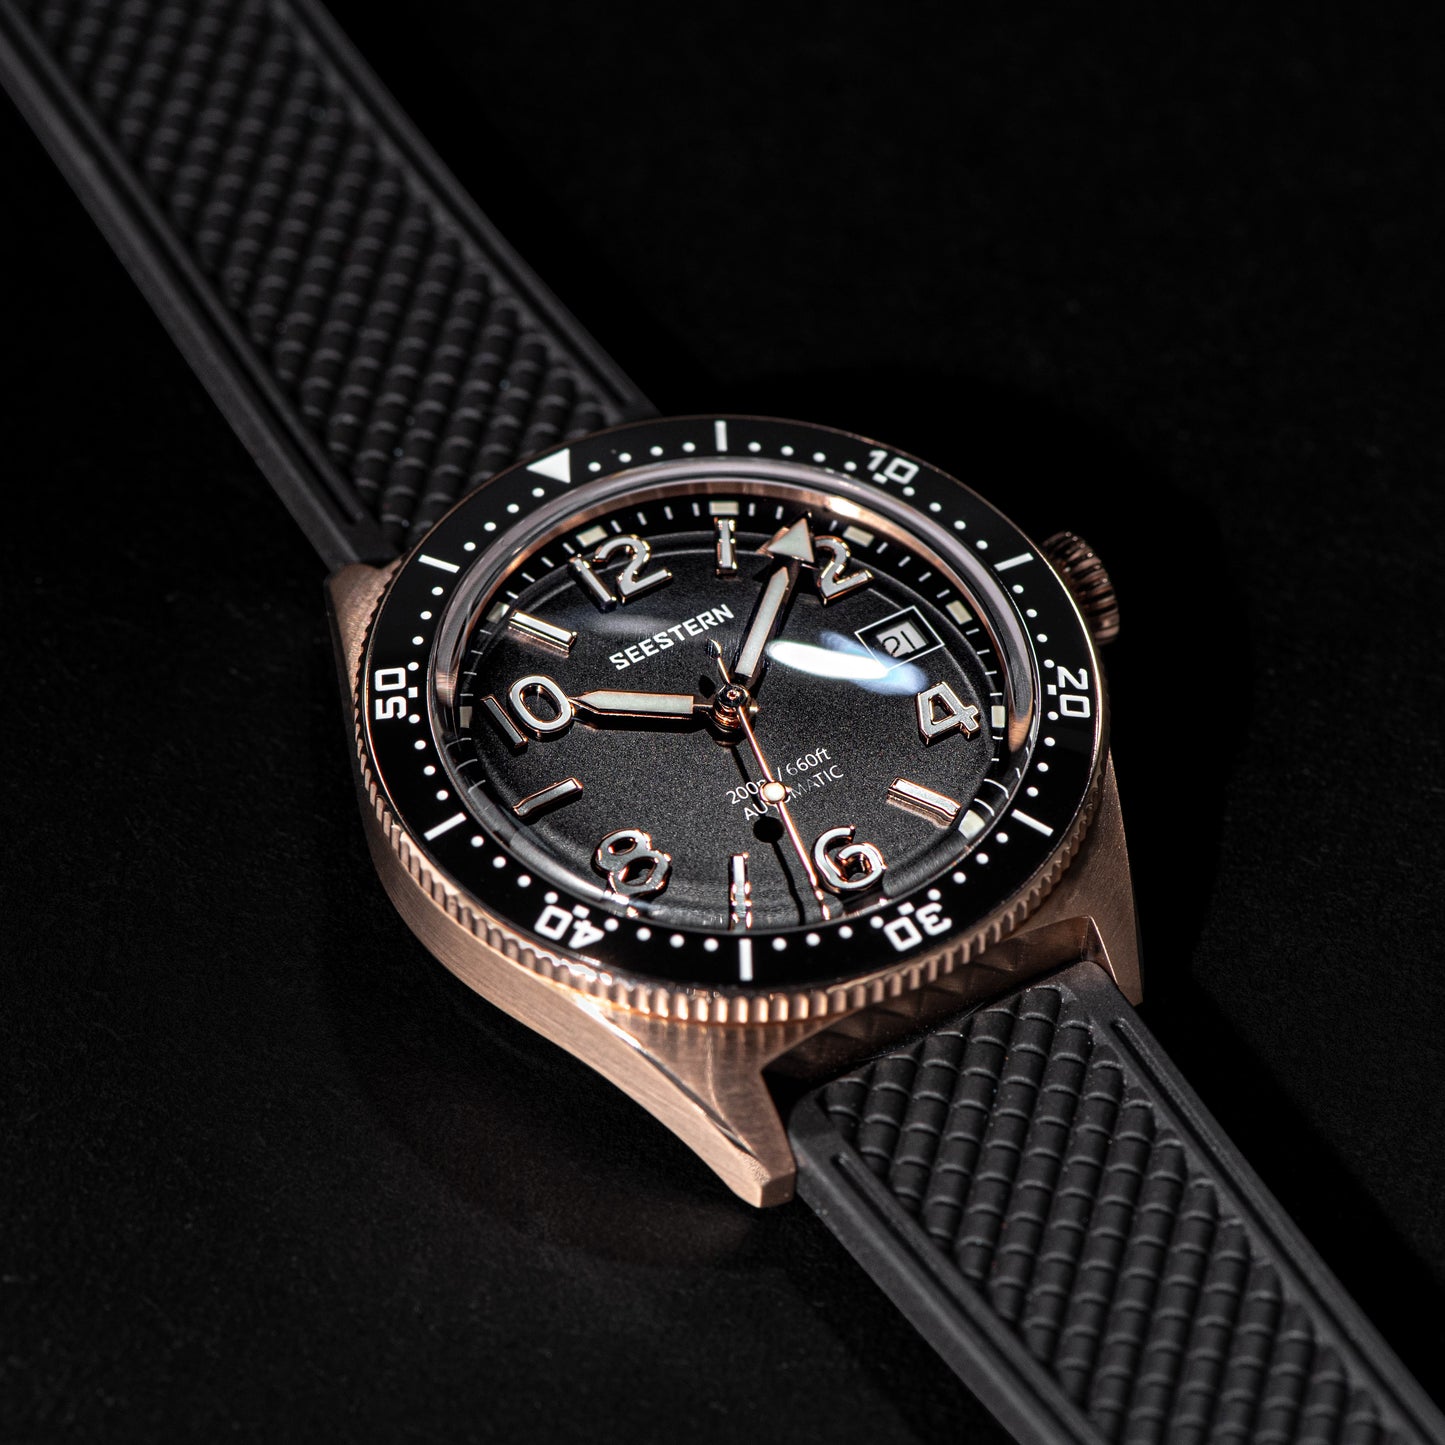 Seestern S435 Professional Diver Rose Gold Rubber Band (Seagull ST2130 movement)